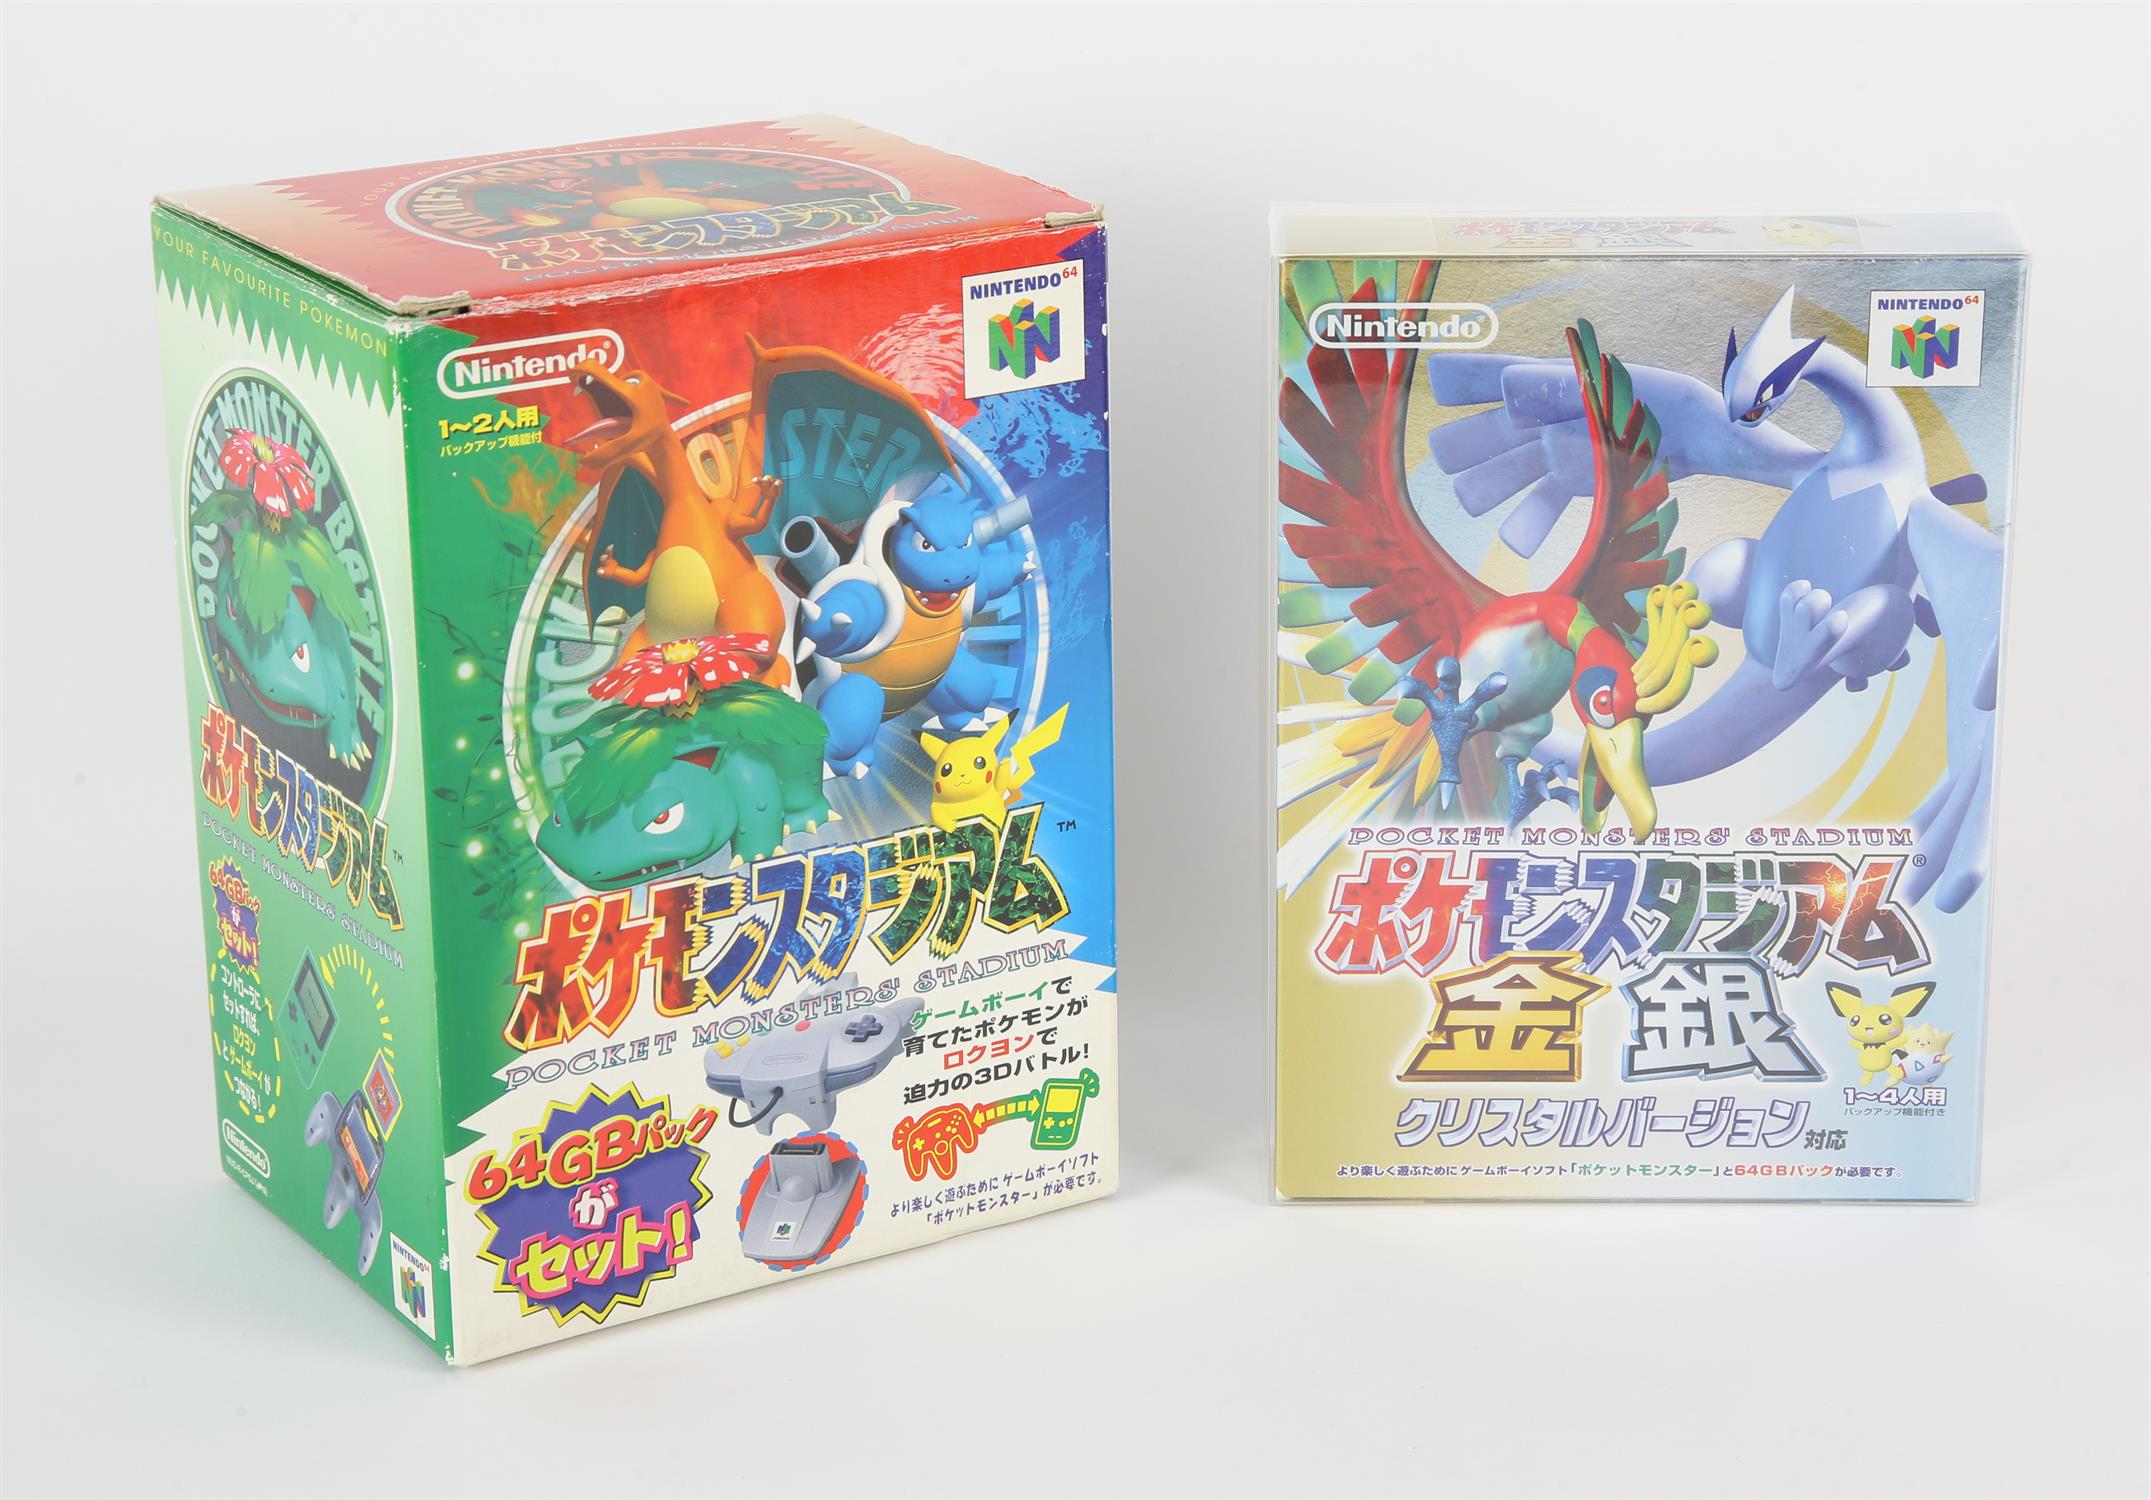 2 boxed Pokémon games for N64 (NTSC-J) Includes: Pocket Monsters' Stadium 2 and Pocket Monsters'